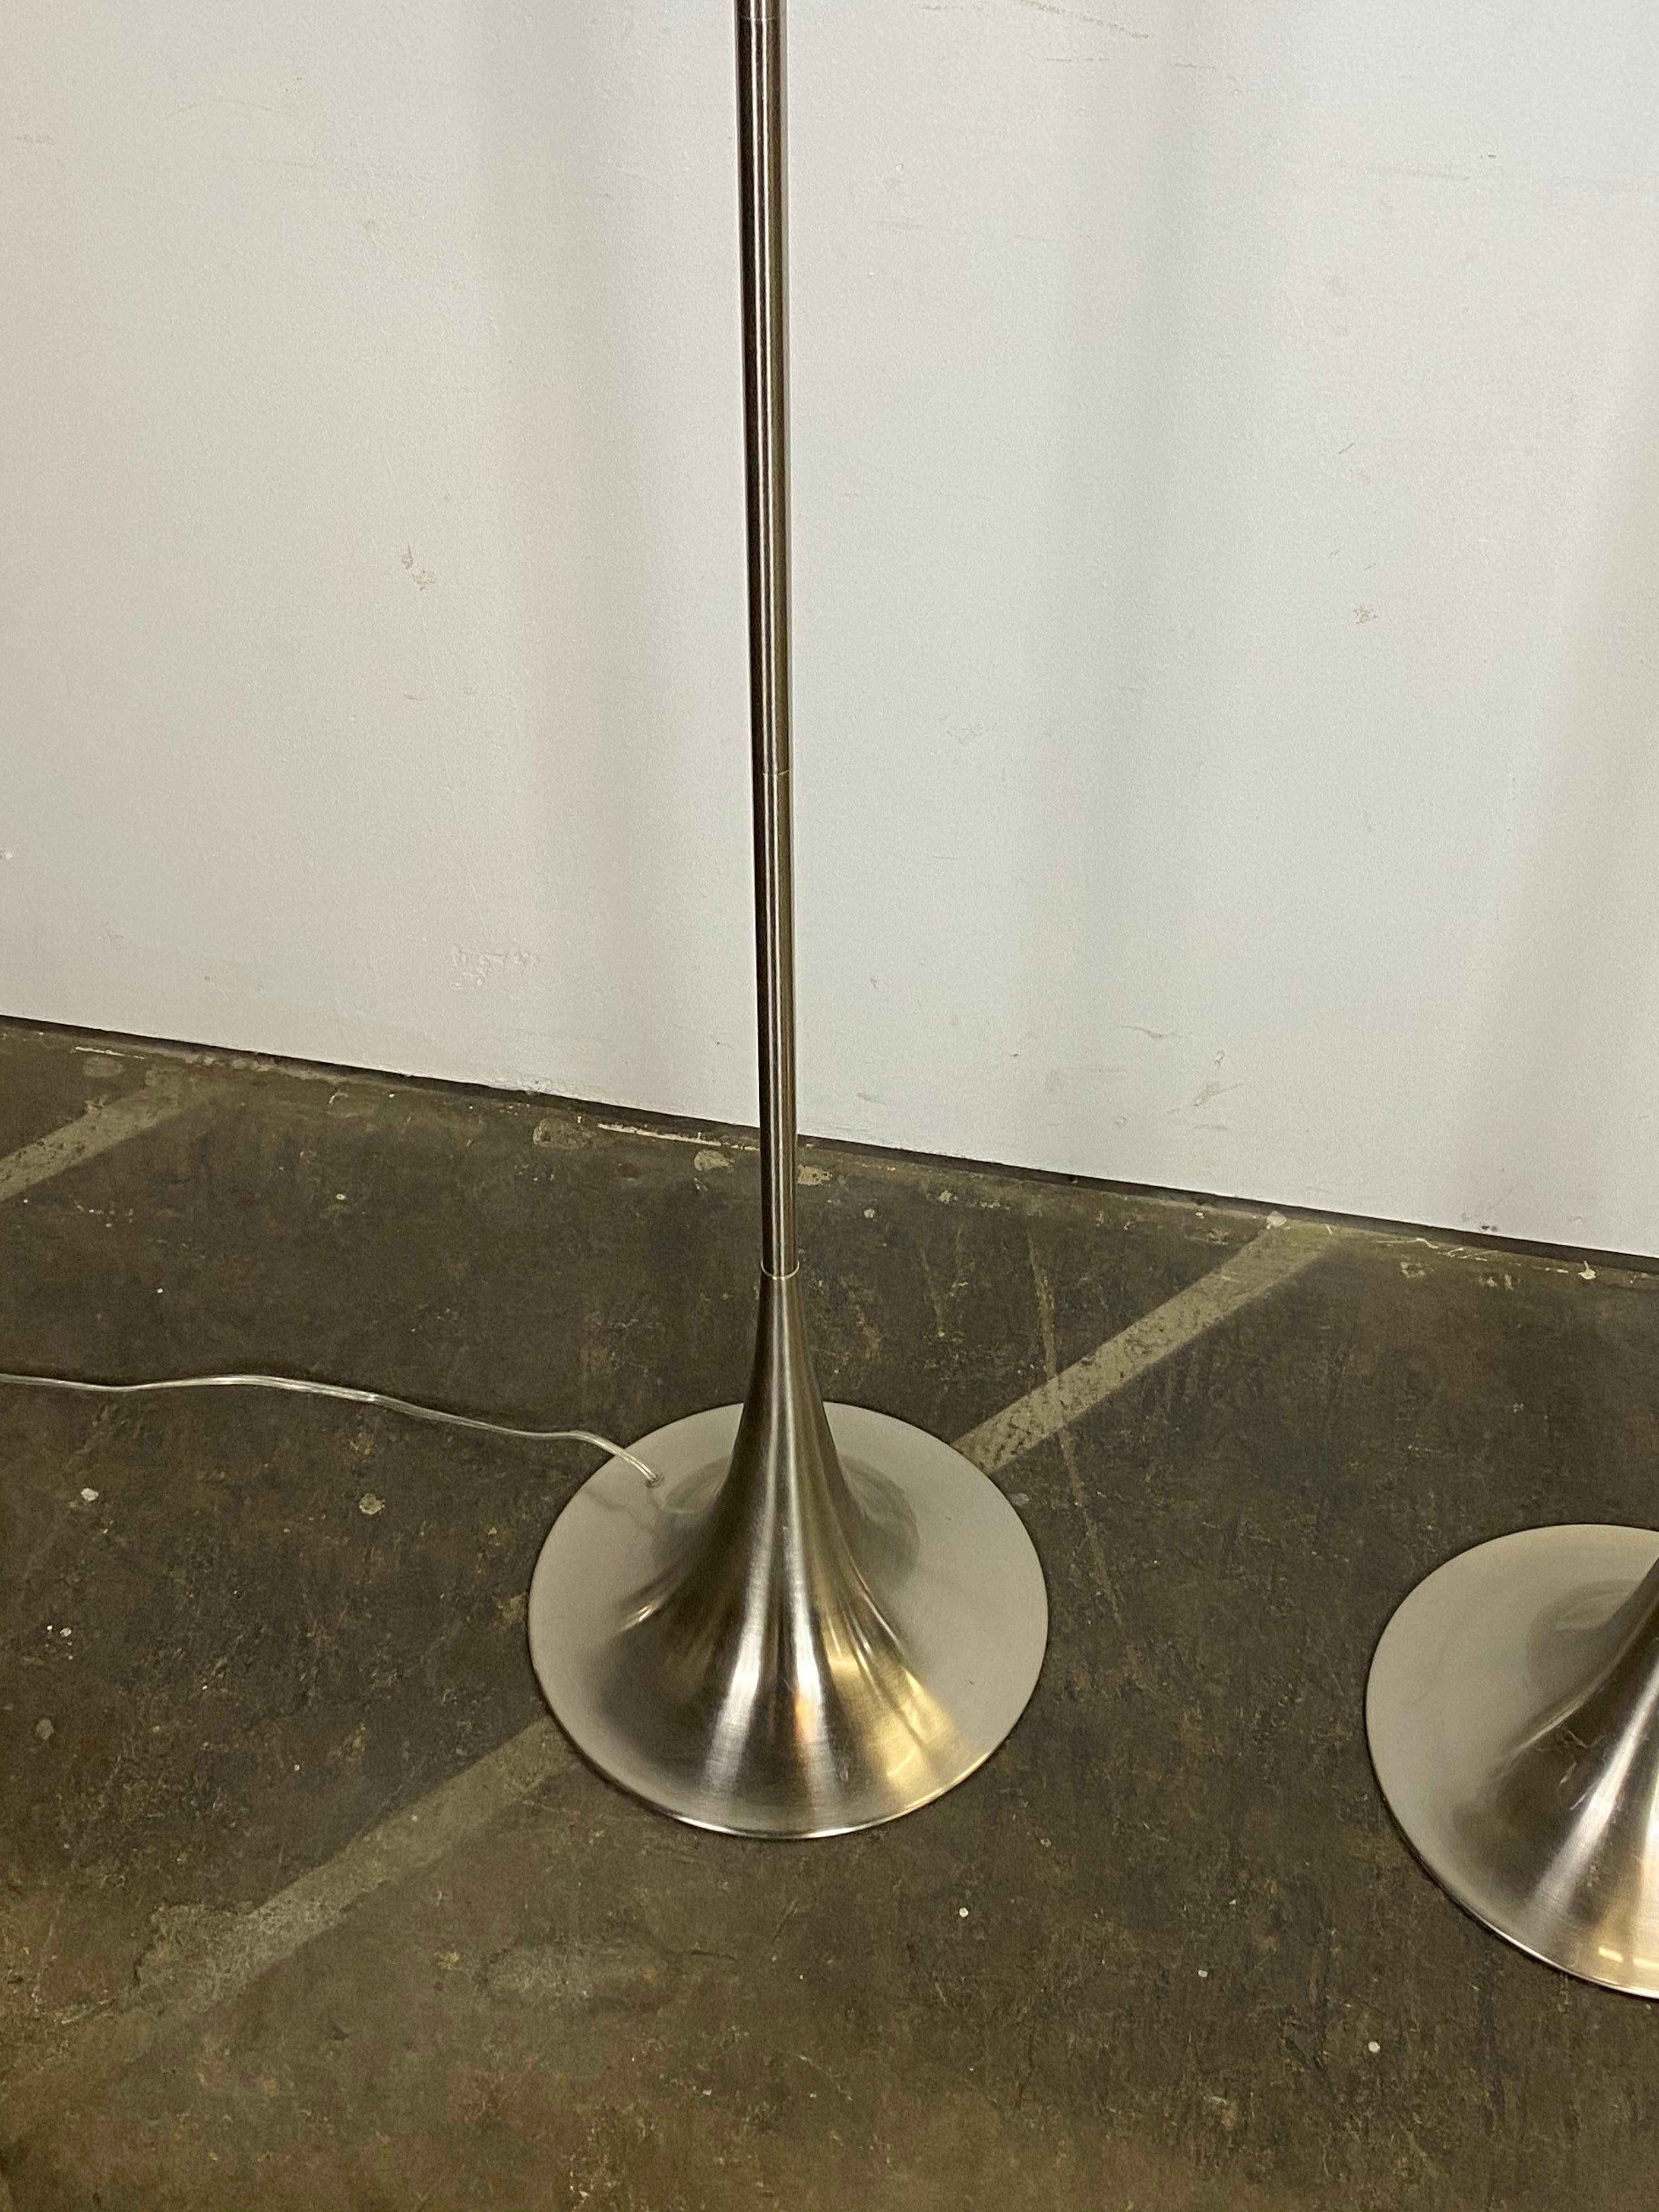 Metal Chic Mid-Century Modern Style Floor Lamps with Tulip Base and Barrel Shades